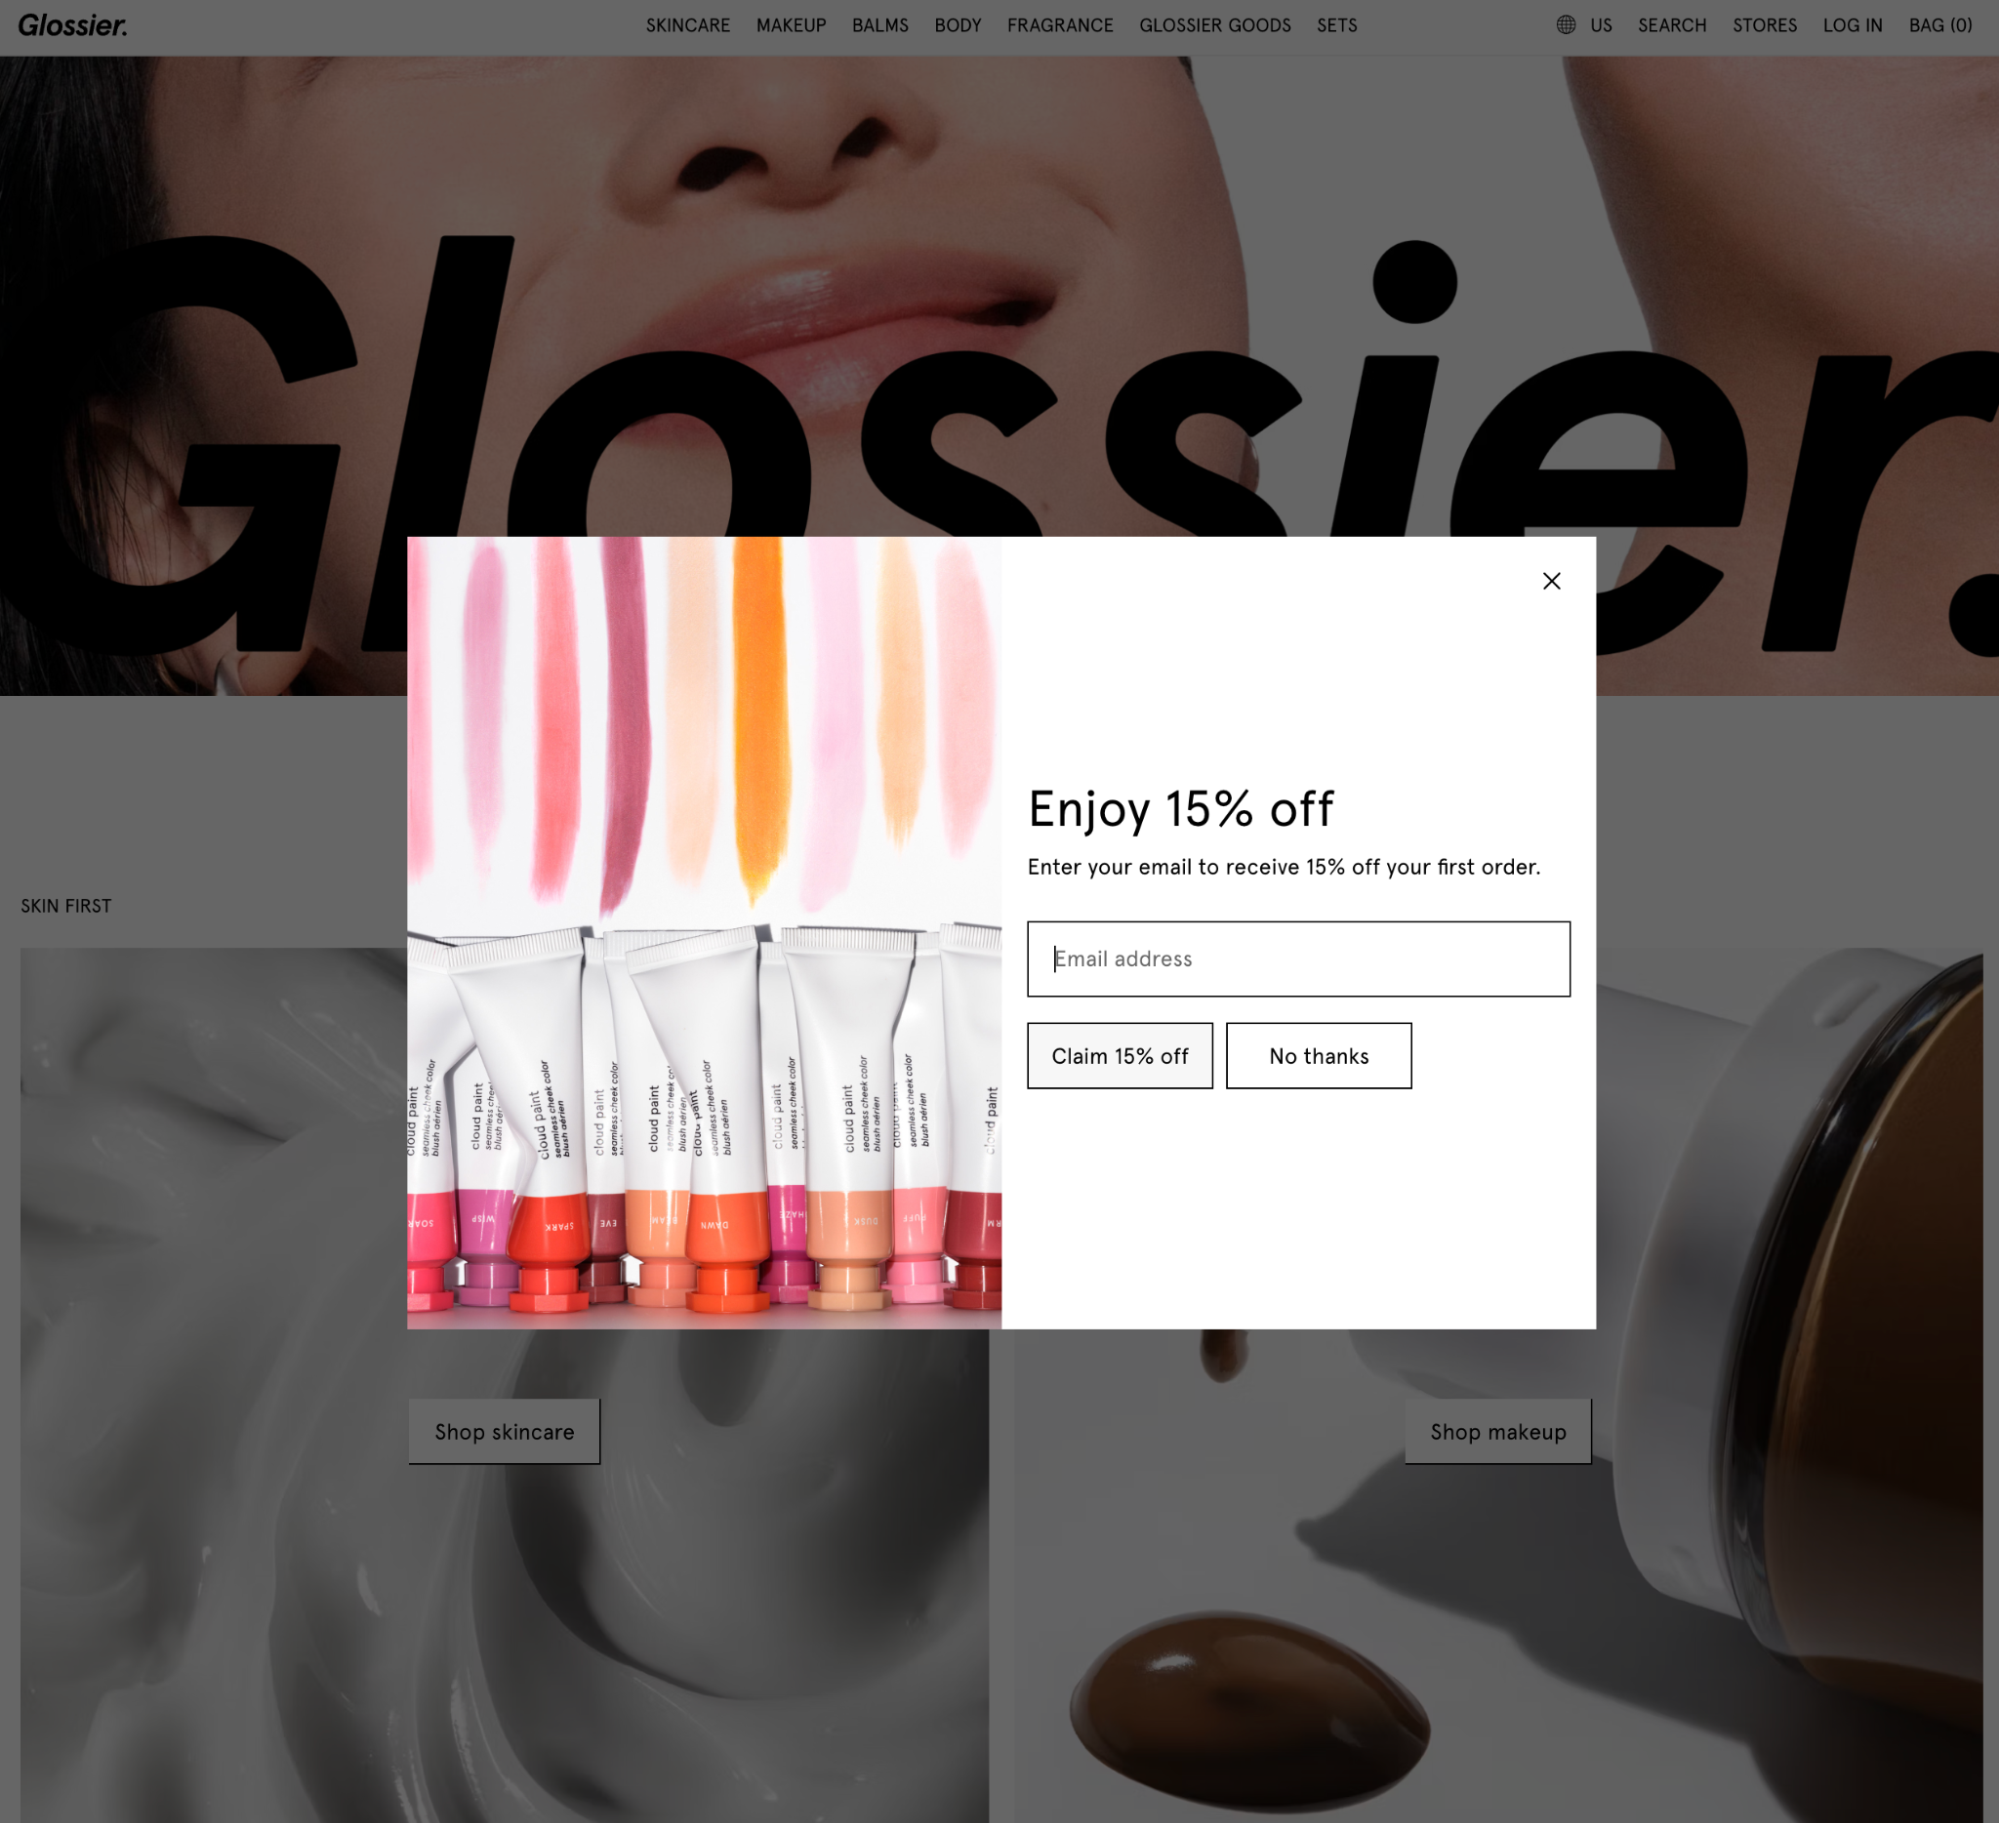 popup on Glossier website with 15% off